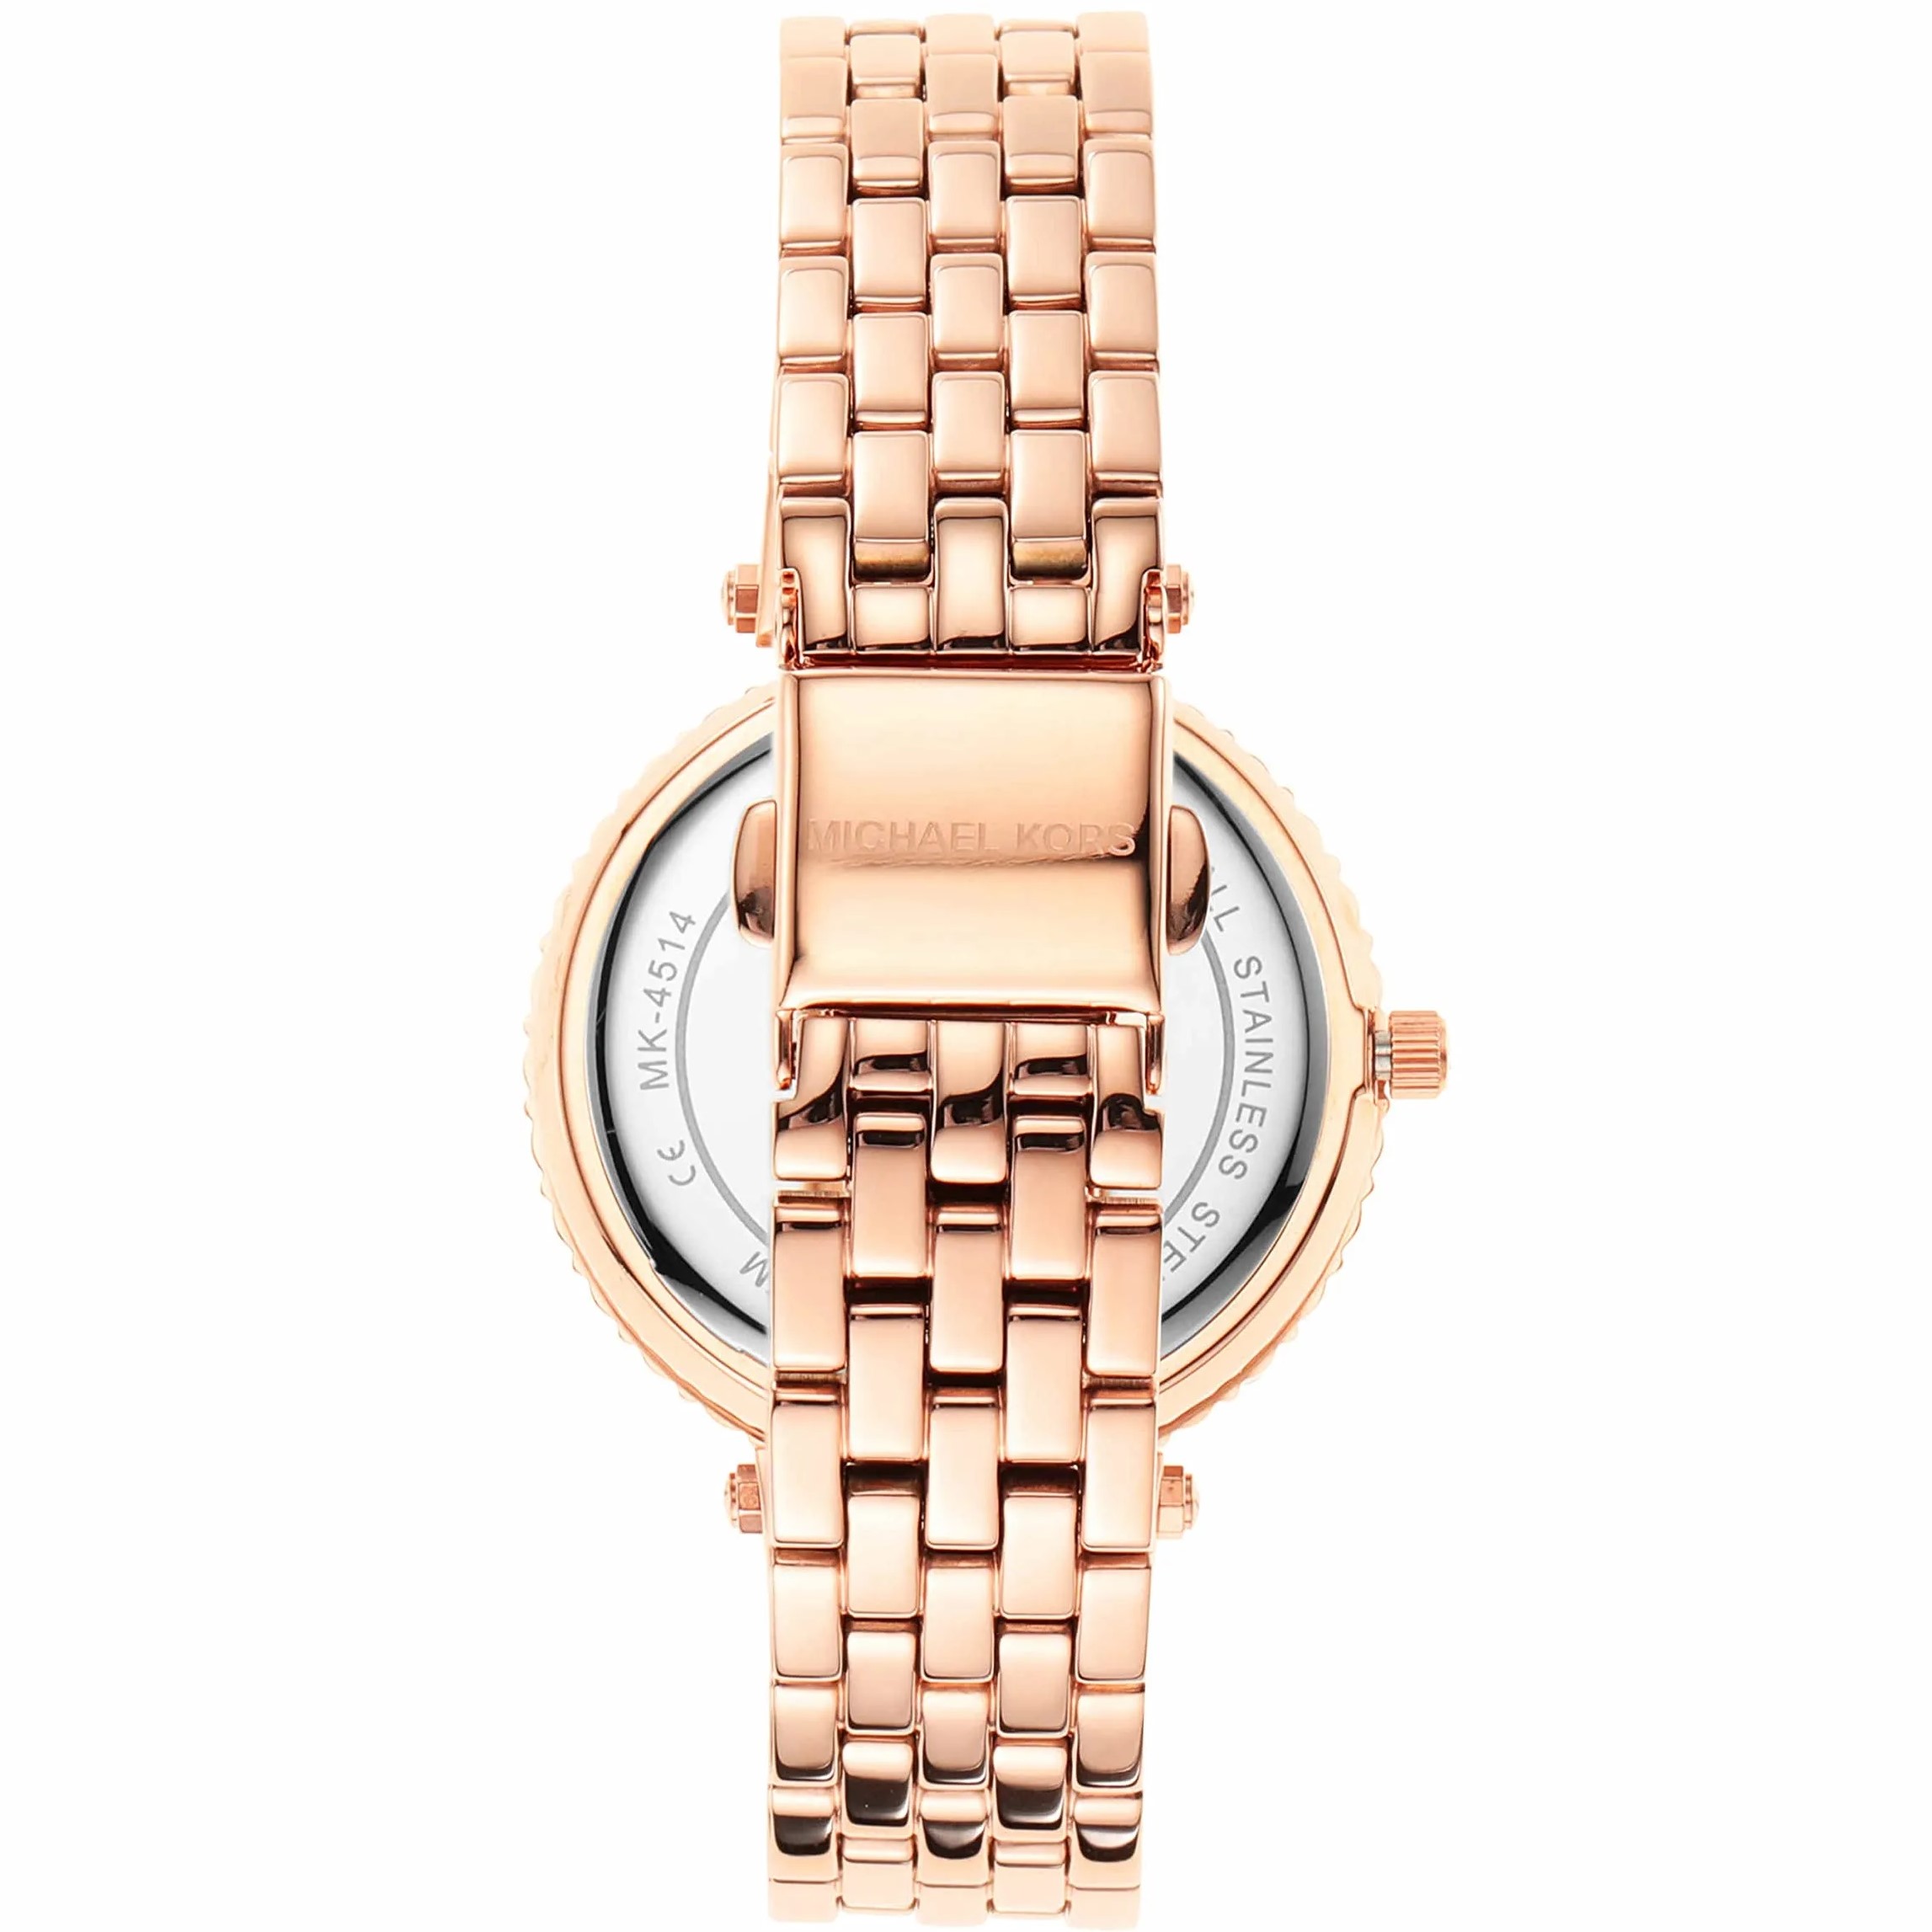 Come to Mama  MK Rose Gold Watch  FFABulust  Michael kors watch rose gold  Watches women michael kors Michael kors accessories